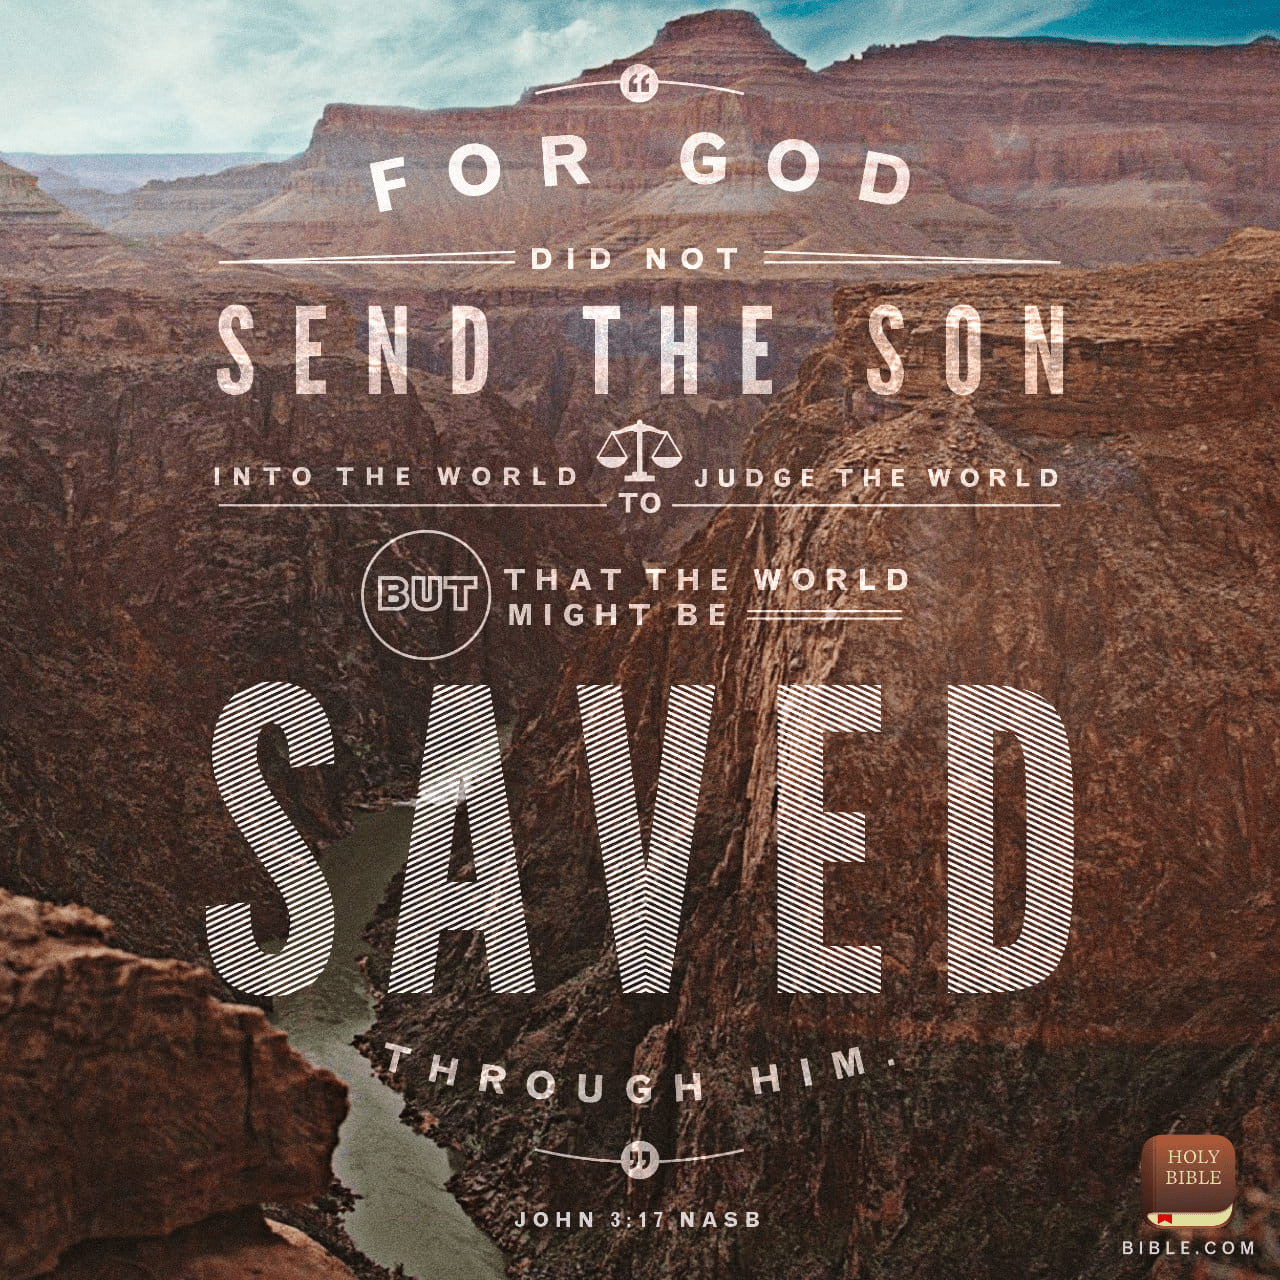  VOTD January 2 - “For God did not send the Son into the world to judge the world, but that the world might be saved through Him.” ‭‭John‬ ‭3:17‬ ‭NASB‬‬